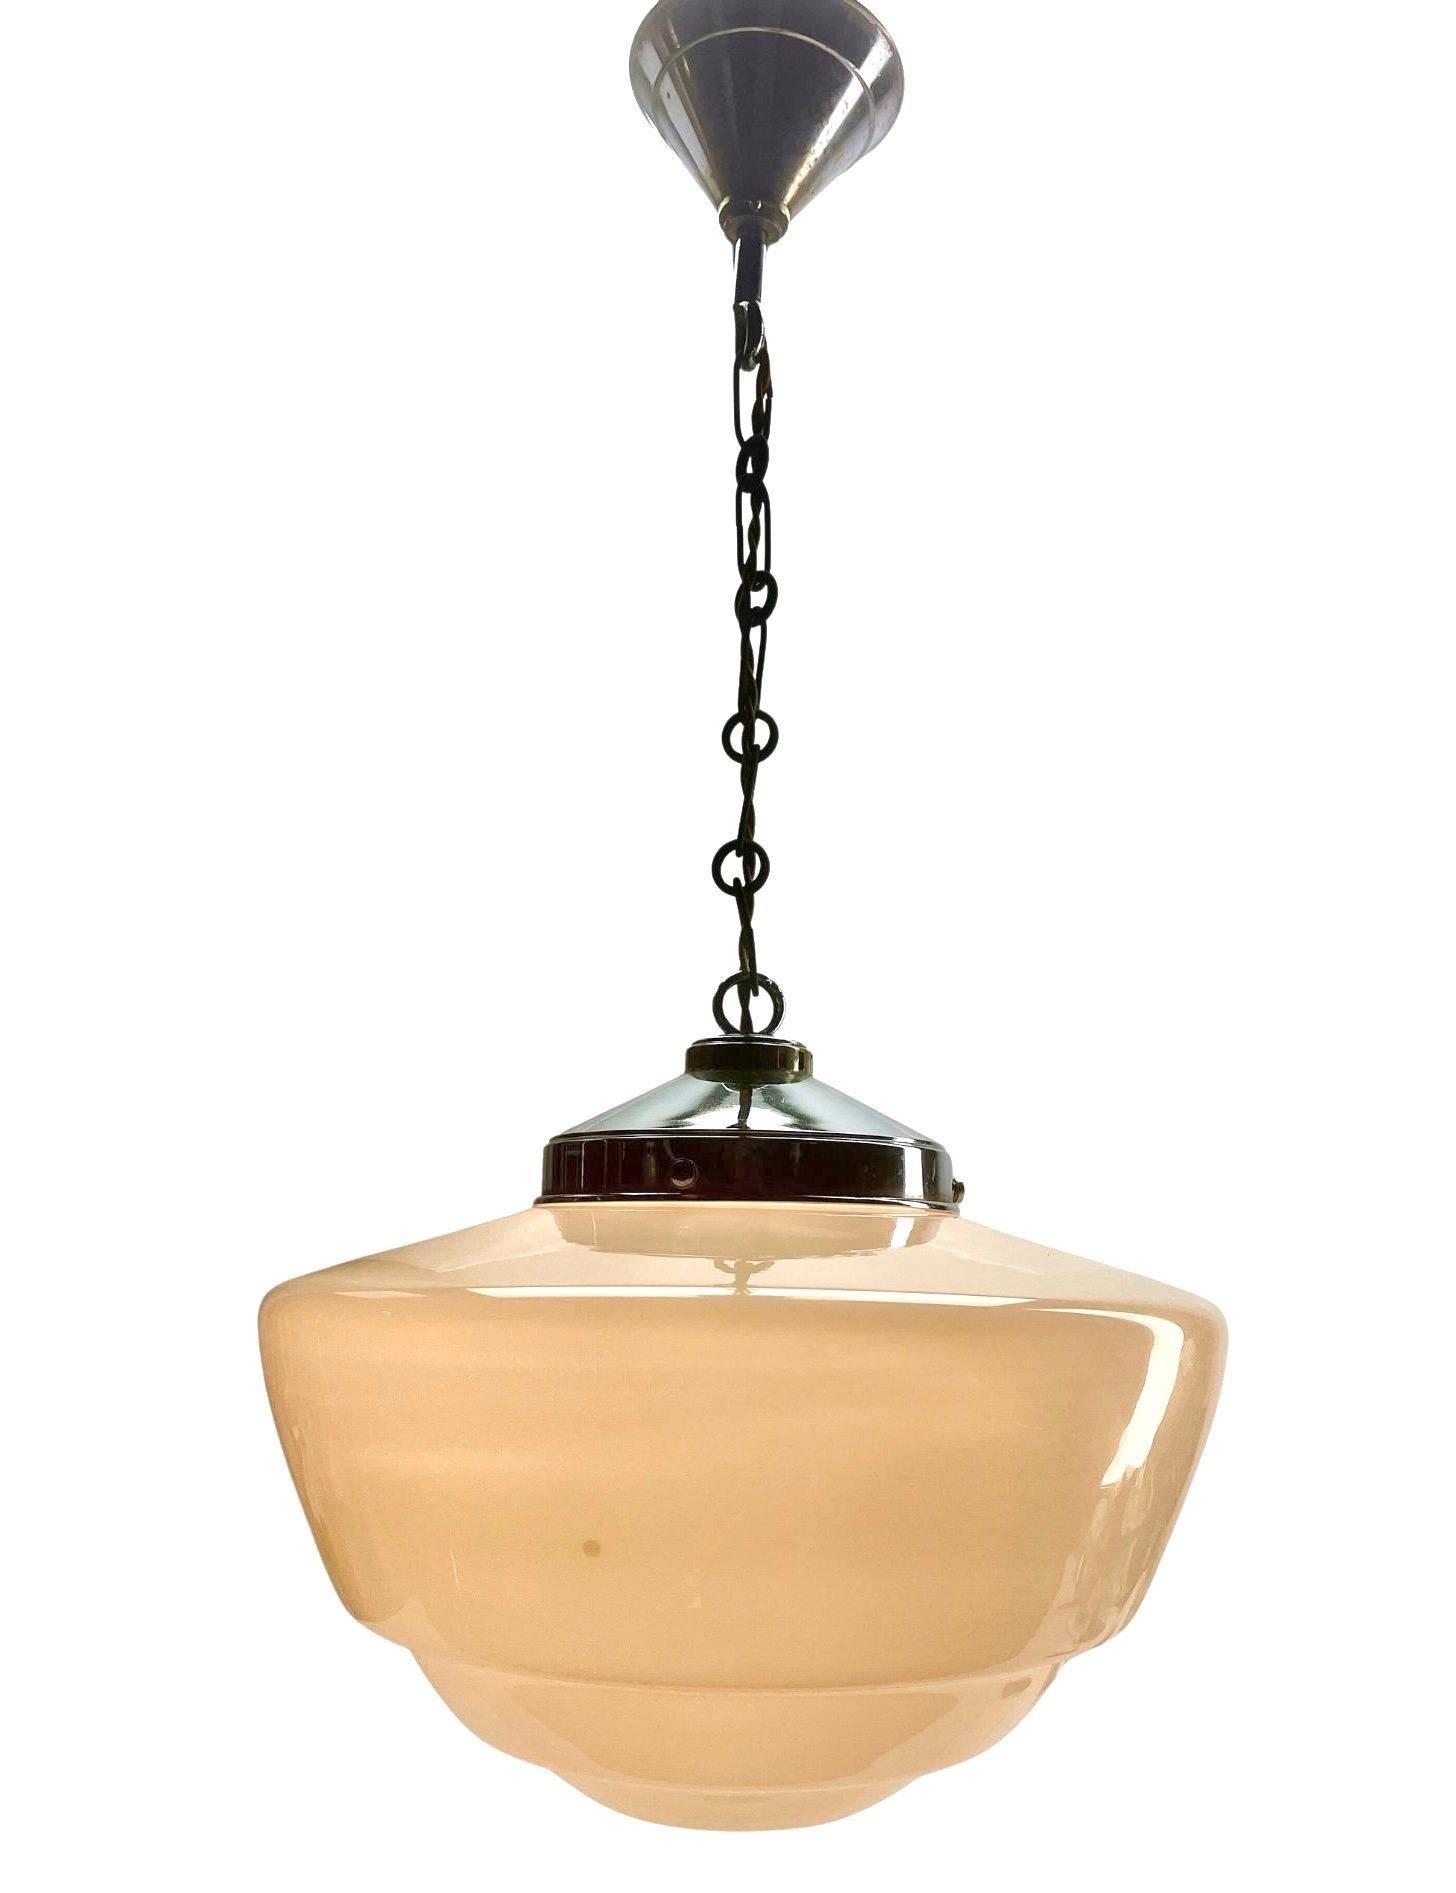 Phillips Pendant Lamp with a Opaline Shade and Chrome Fittings, 1930s, Holland For Sale 4